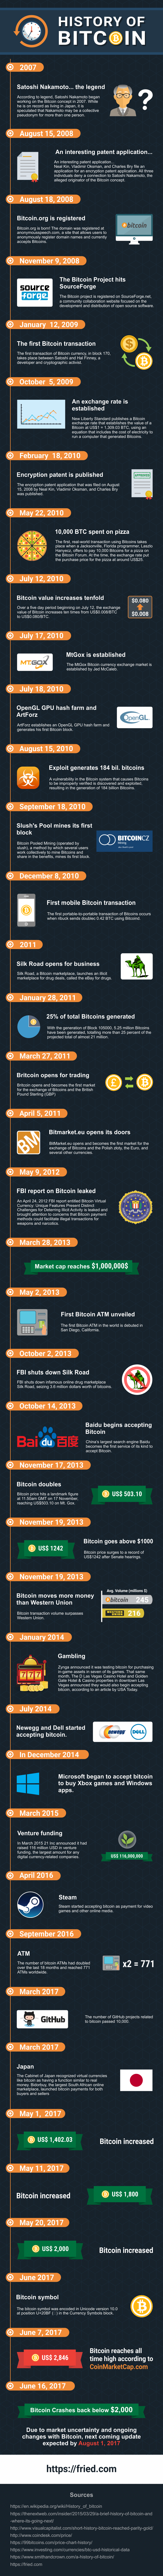 History of Bitcoin Infographic